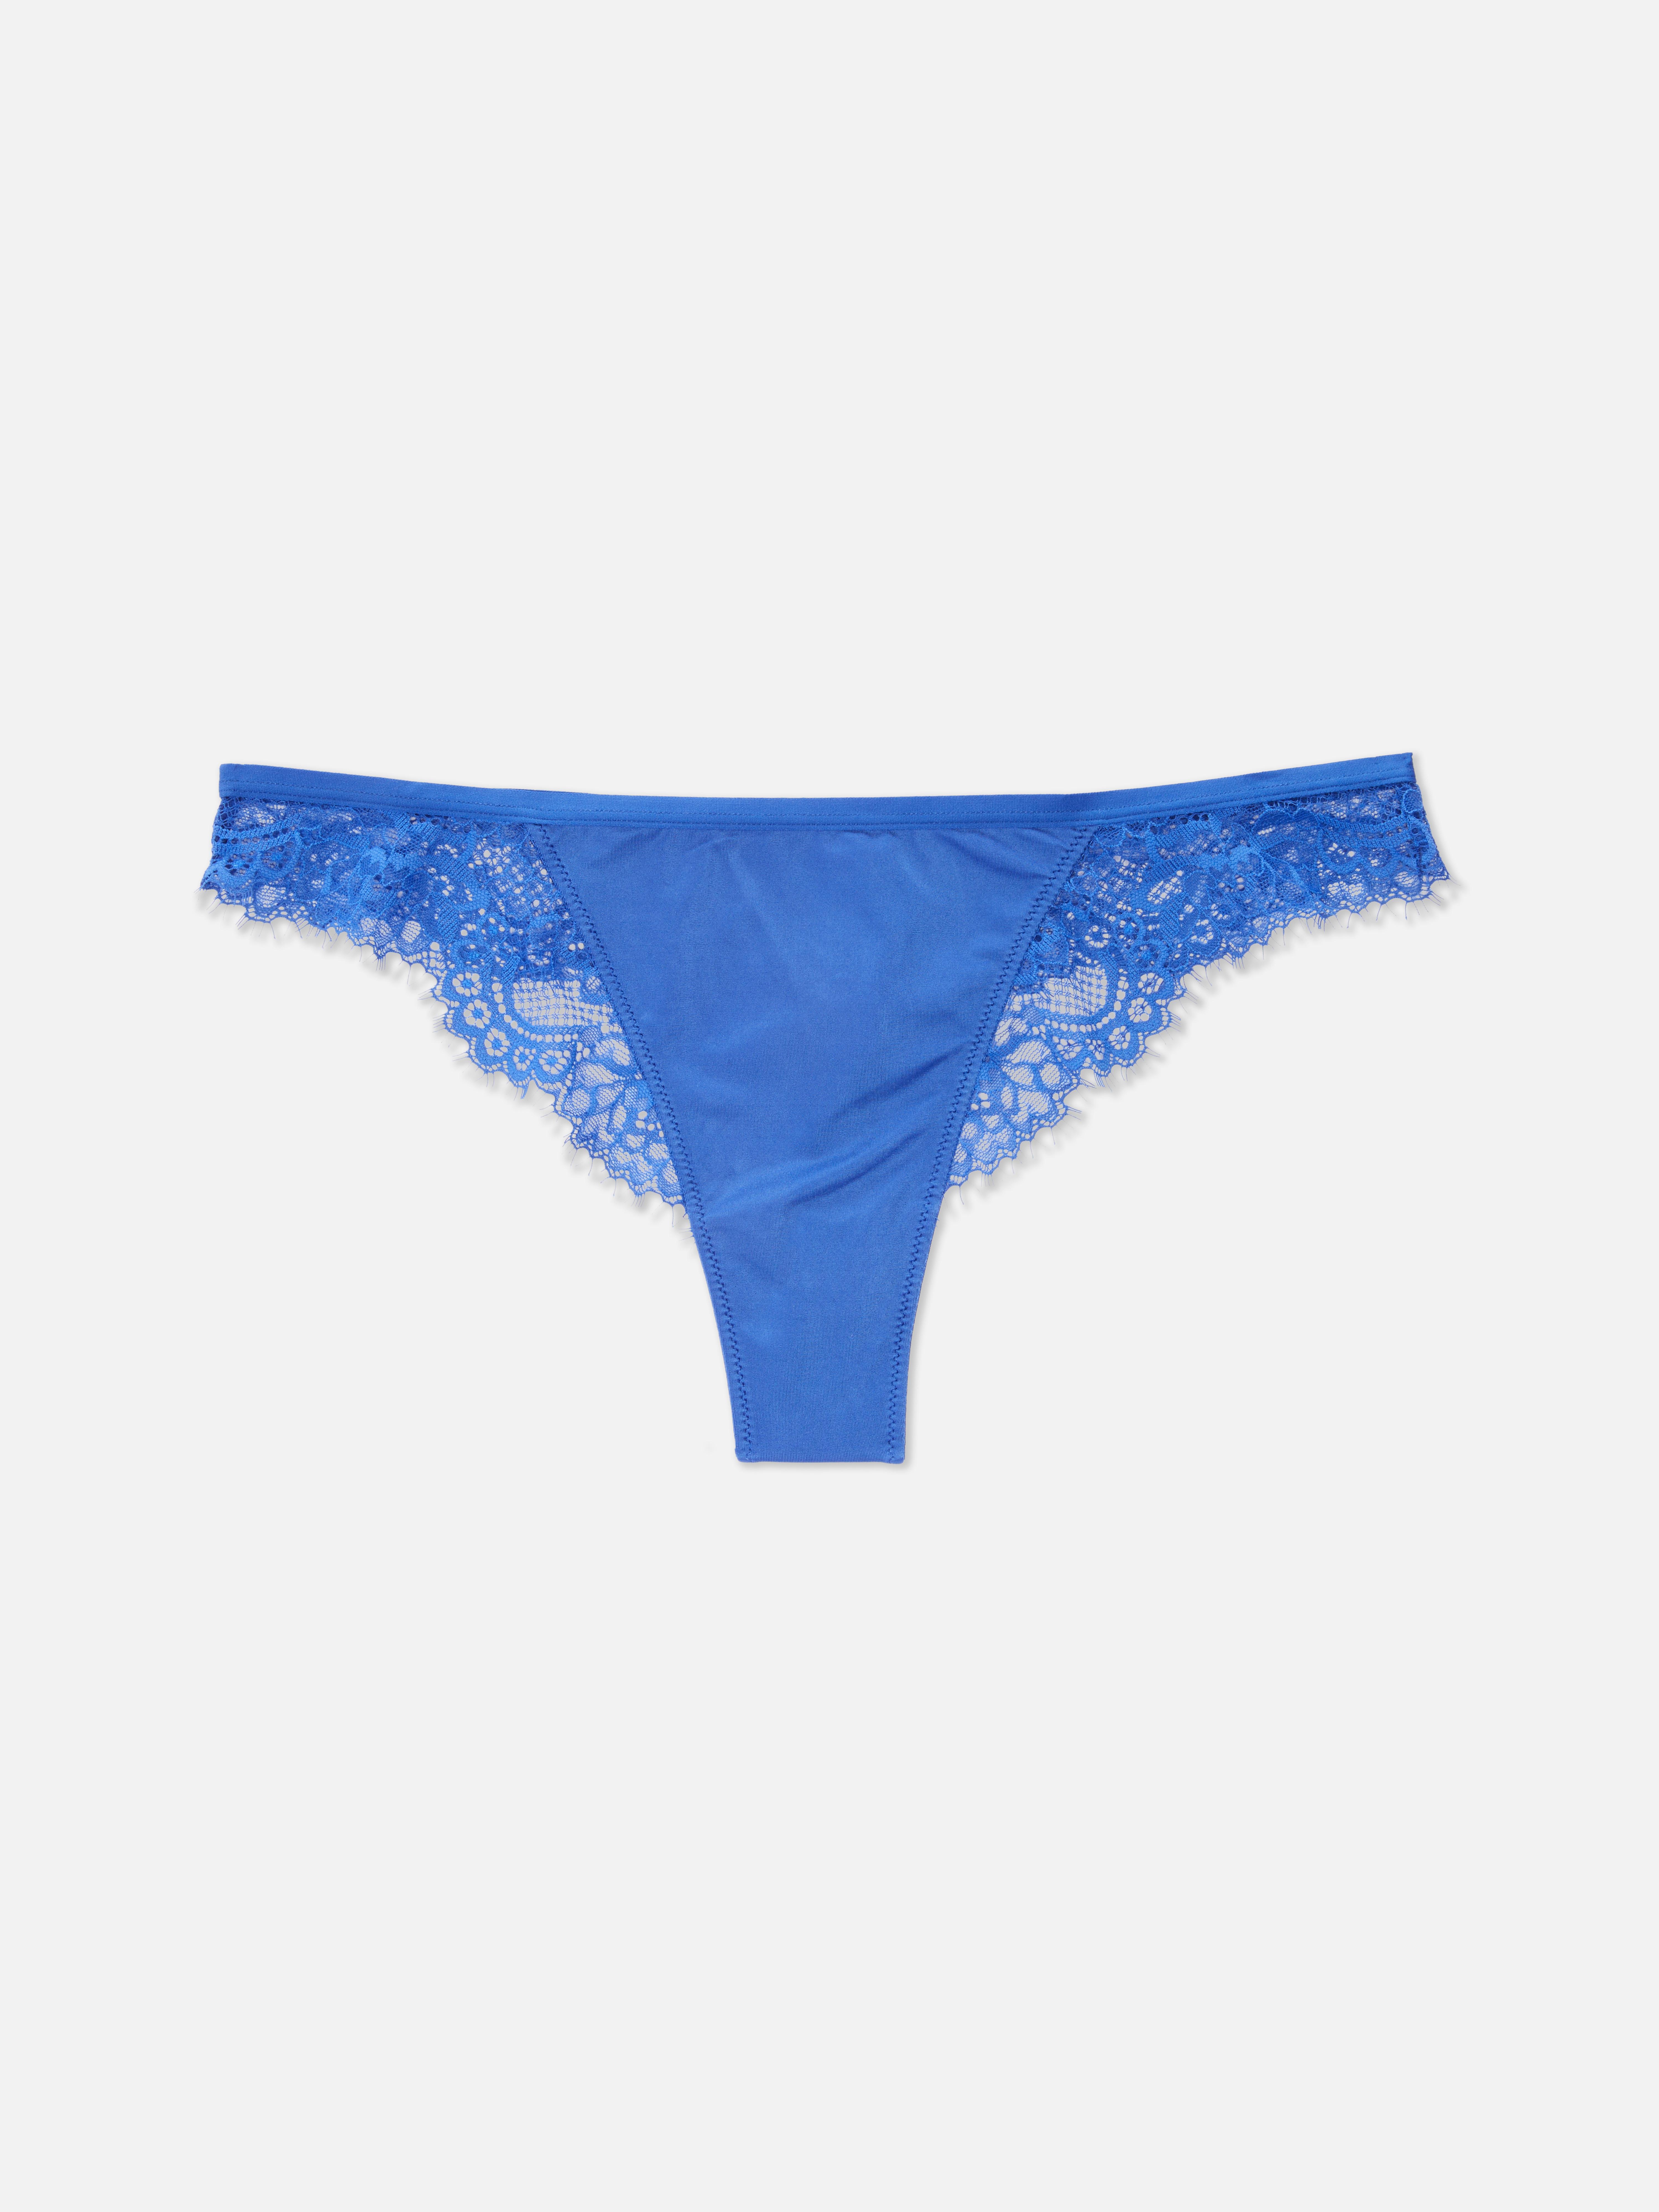 Multipack Knickers 20 No Low Rise Shorts Primark Uk Online